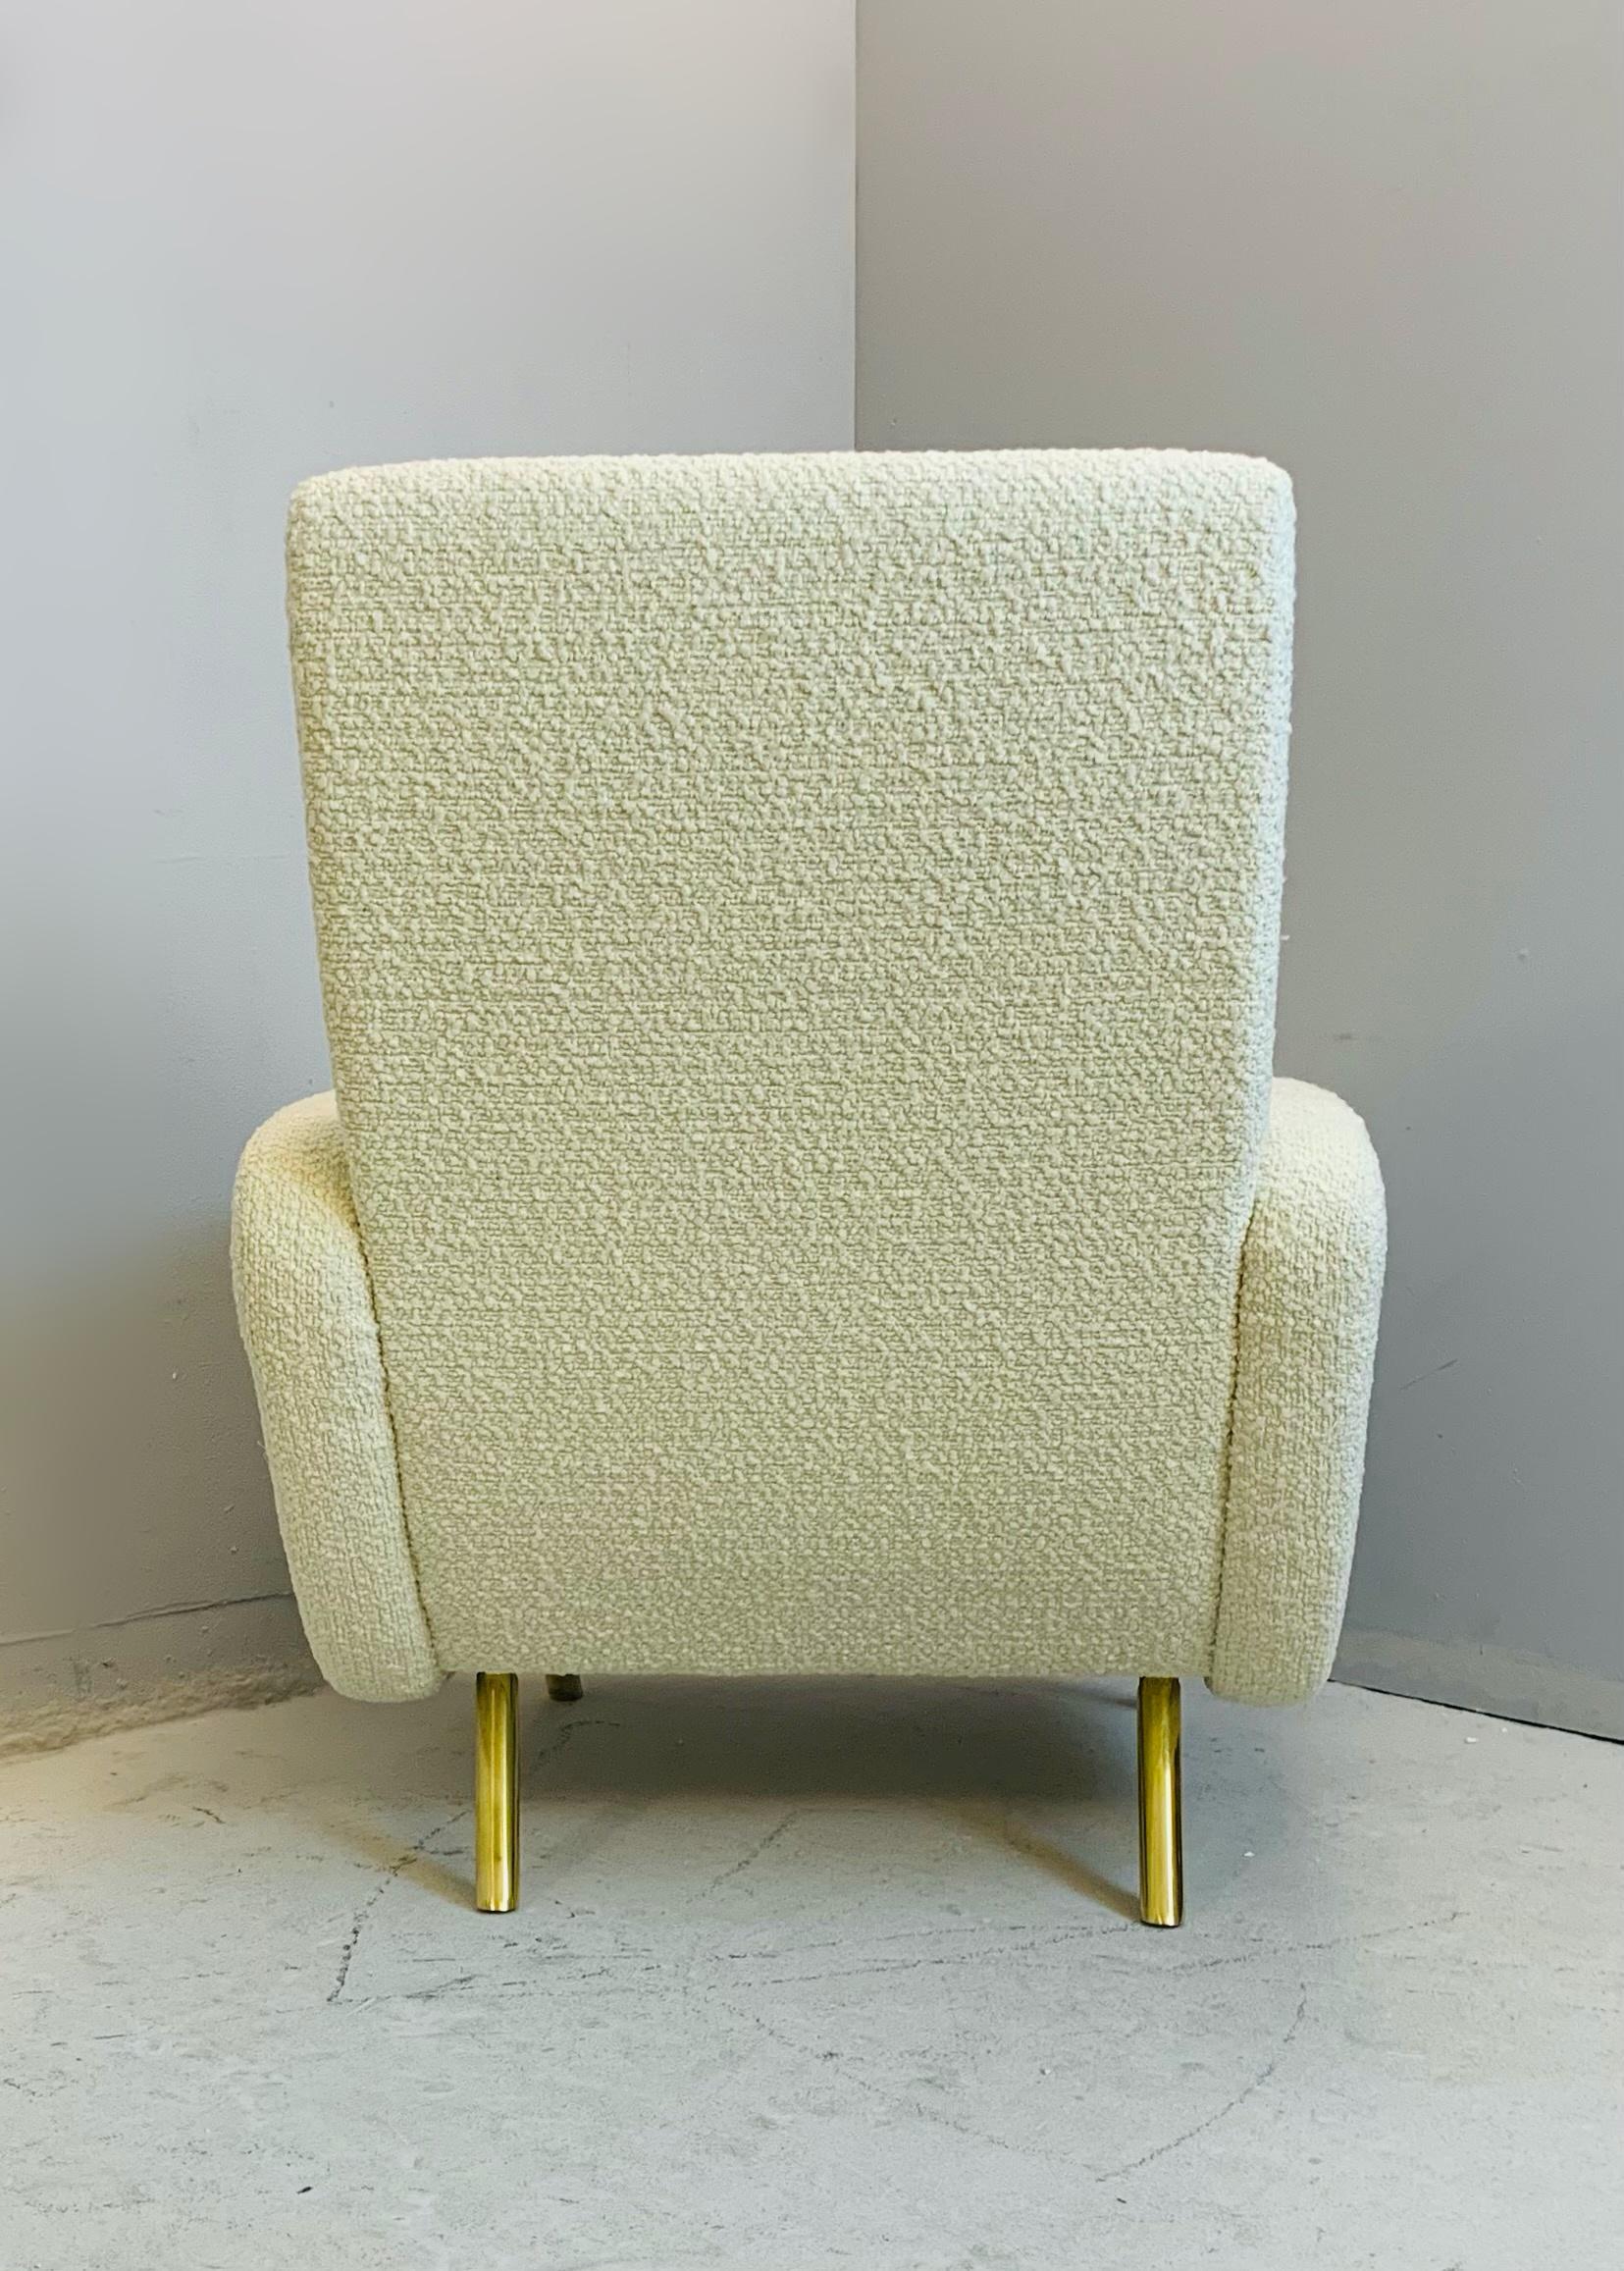 Pair of Mid-Century Modern Italian Armchairs, White Fabric - Reupholstered  1